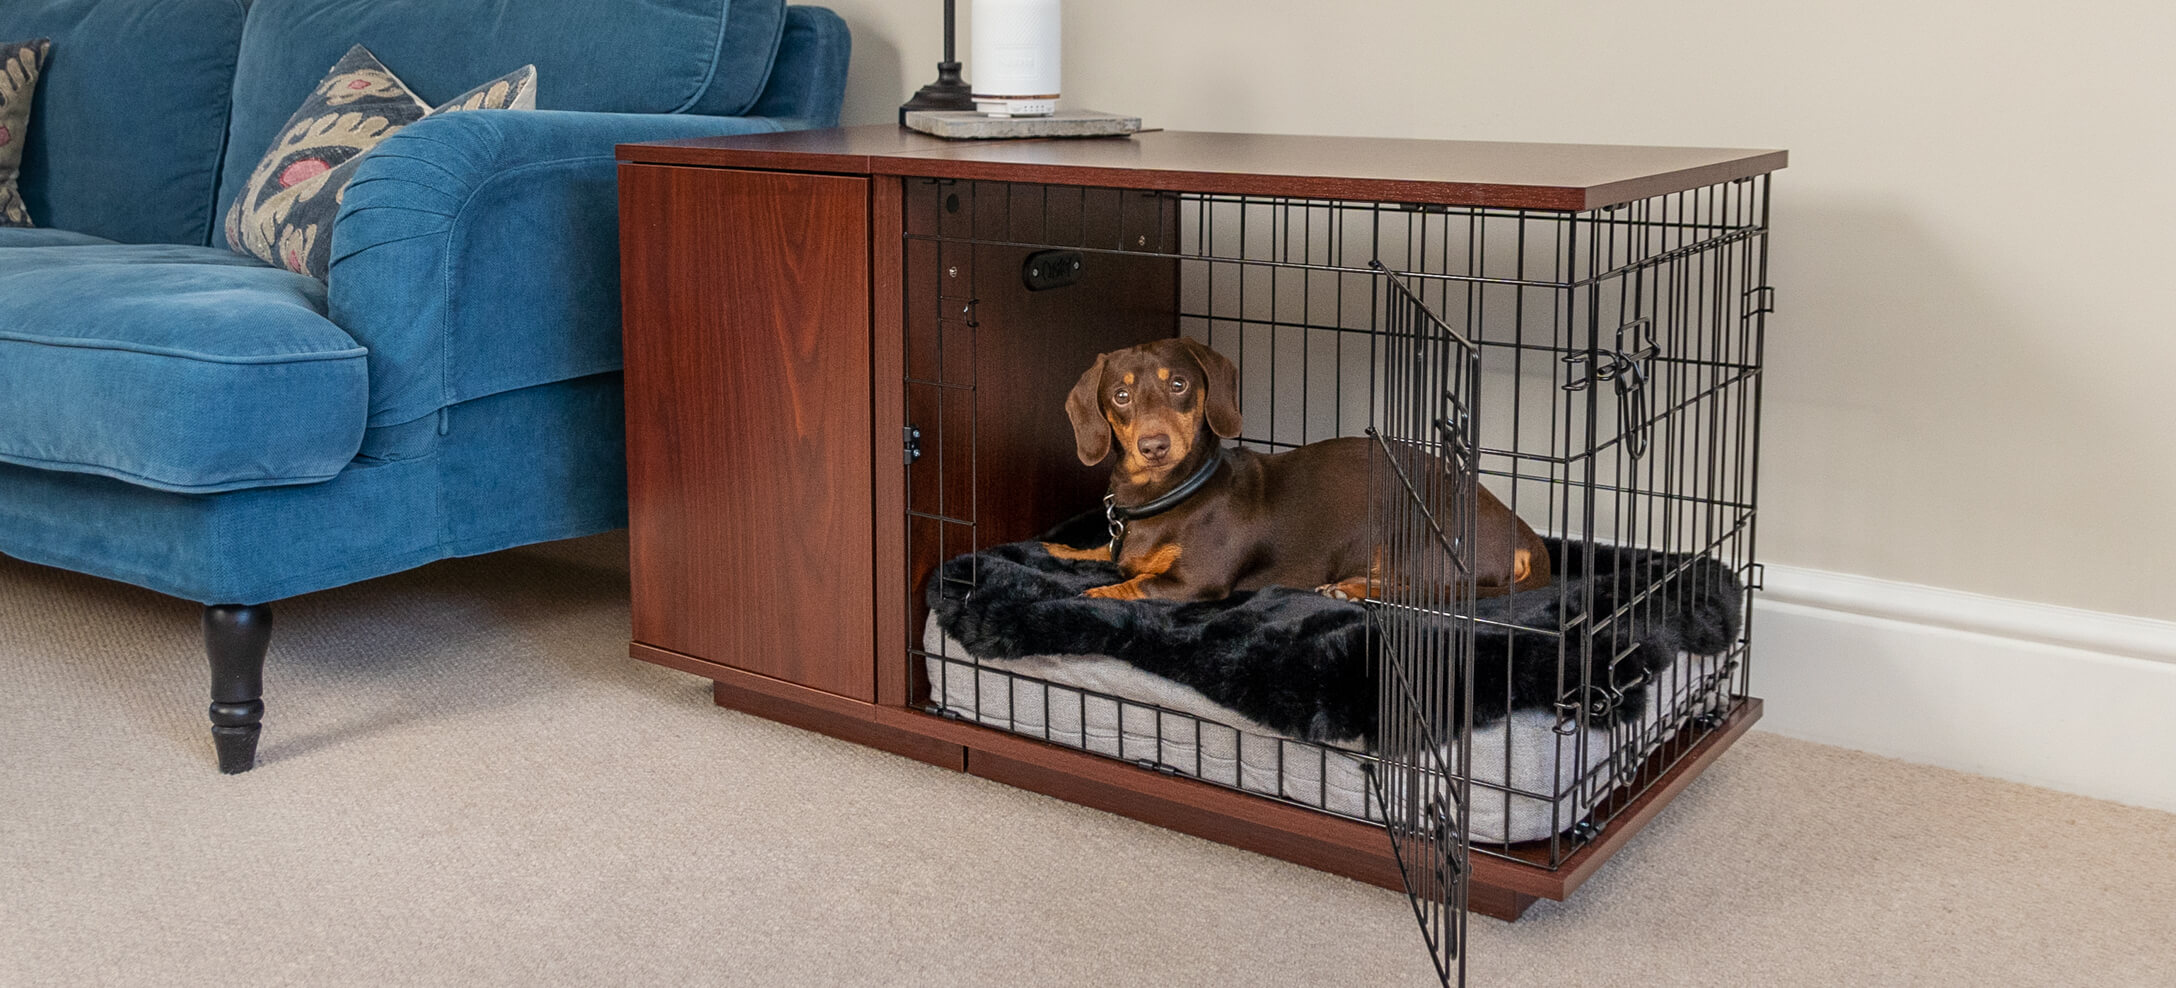 A dog crate creates a safe space for Fido, away from the hustle and bustle of the household